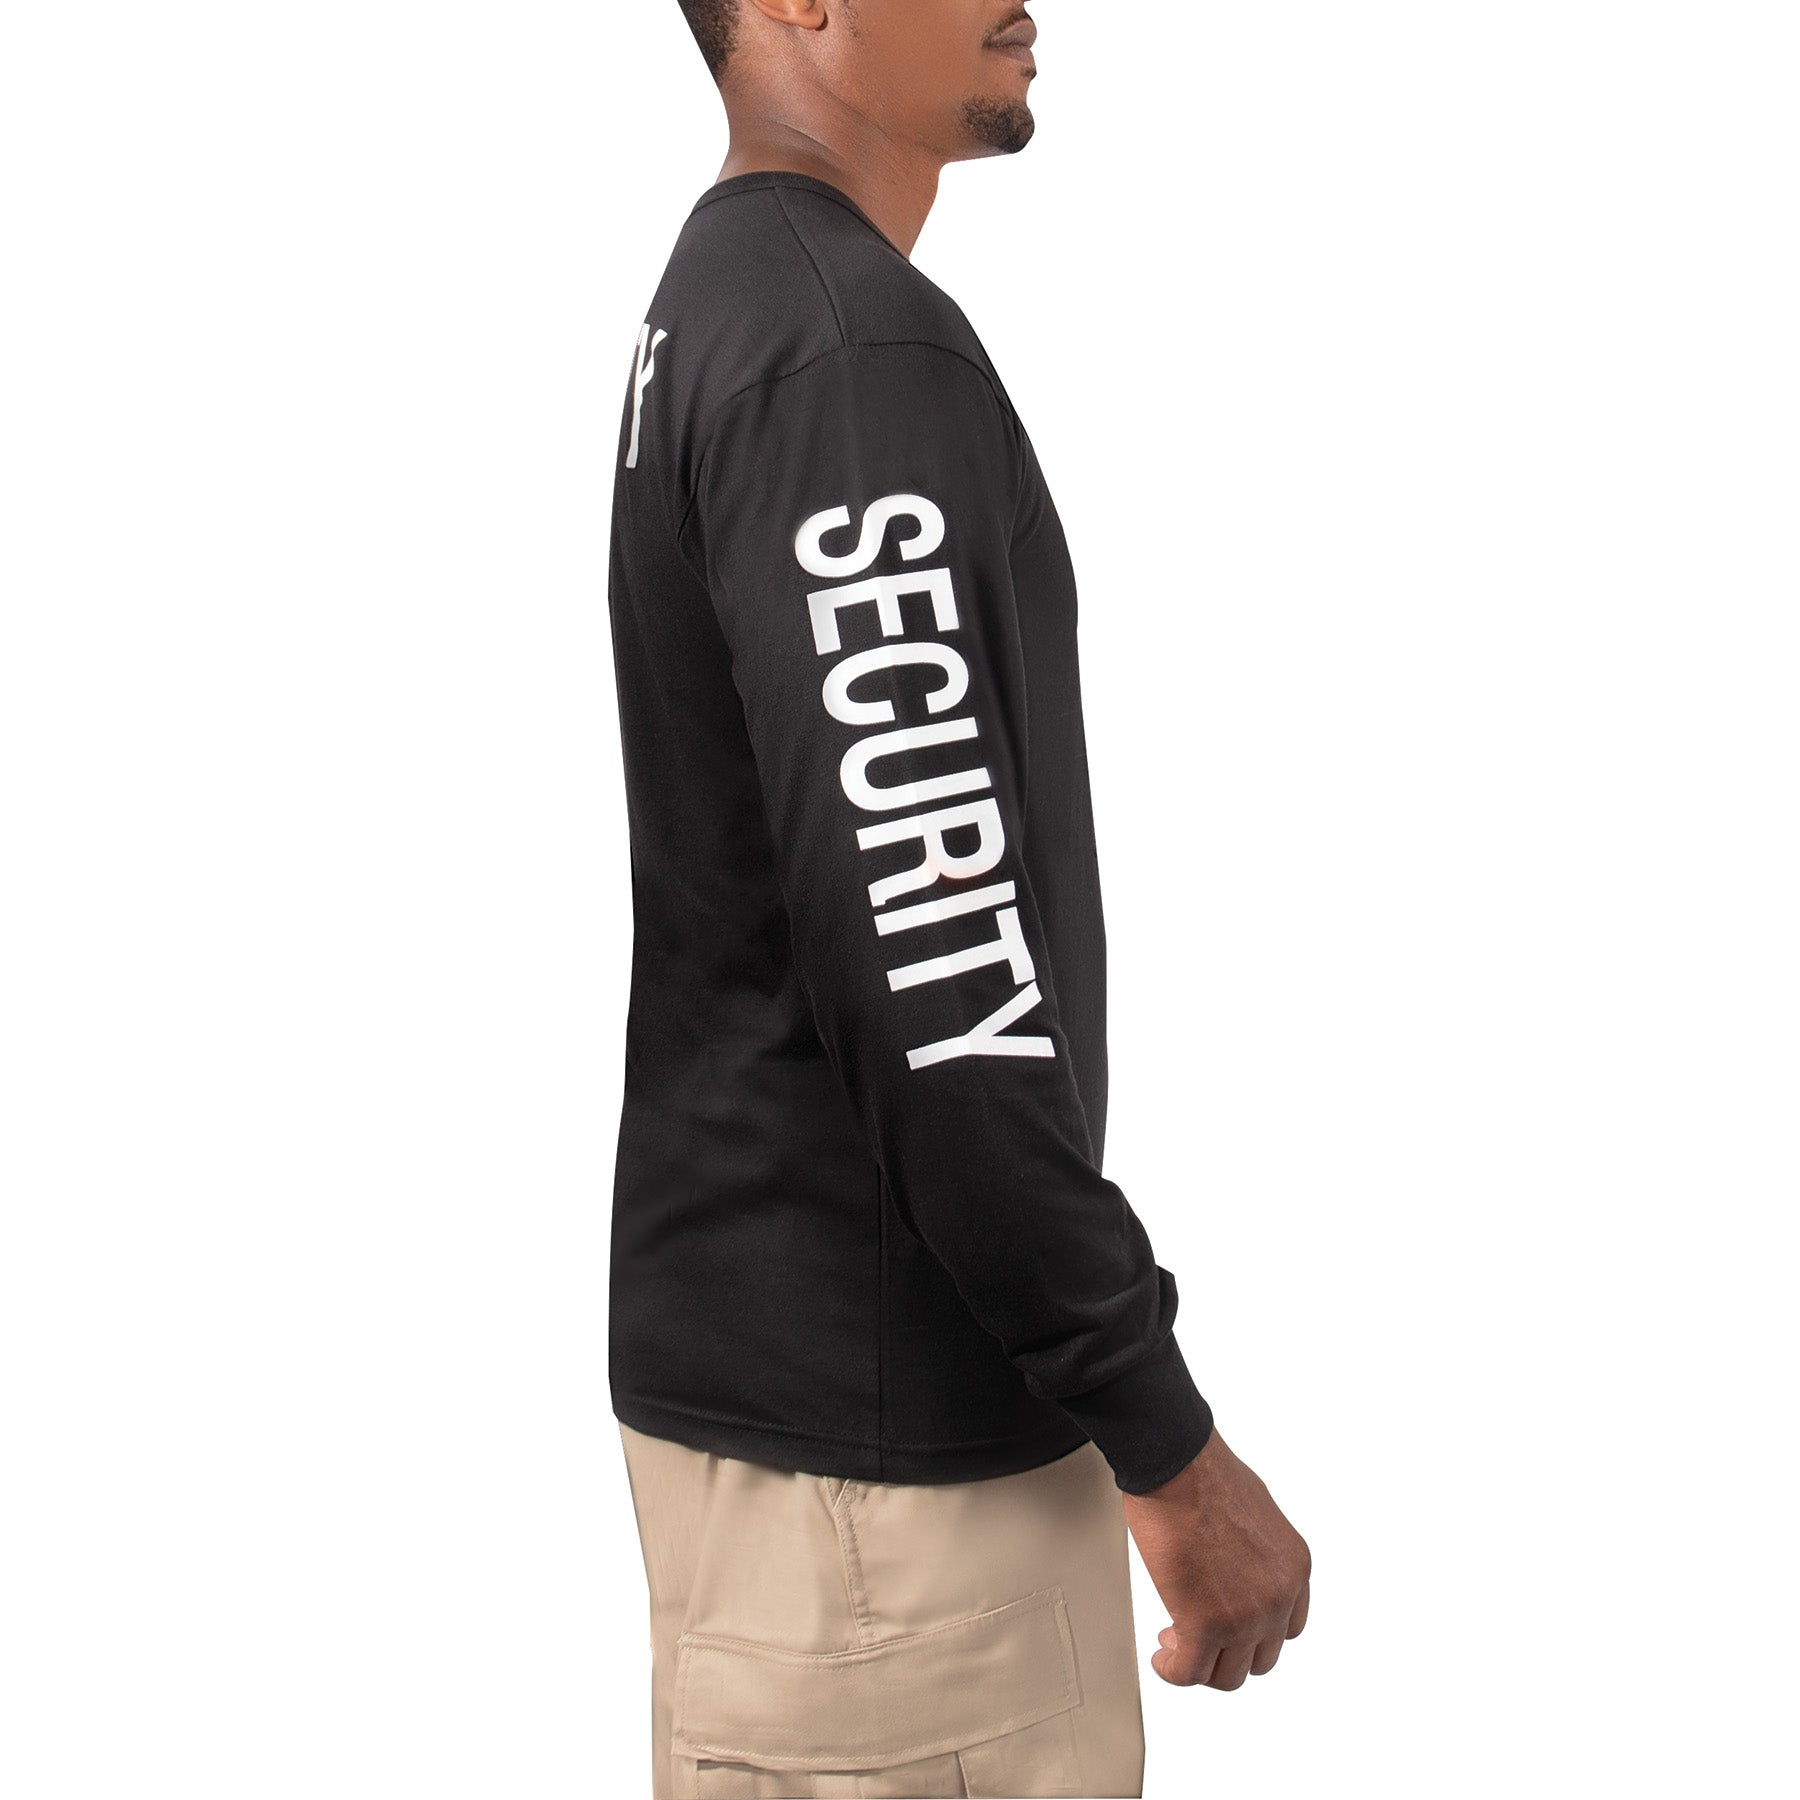 Rothco Long Sleeve Two-Sided Security T-Shirt - Tactical Choice Plus